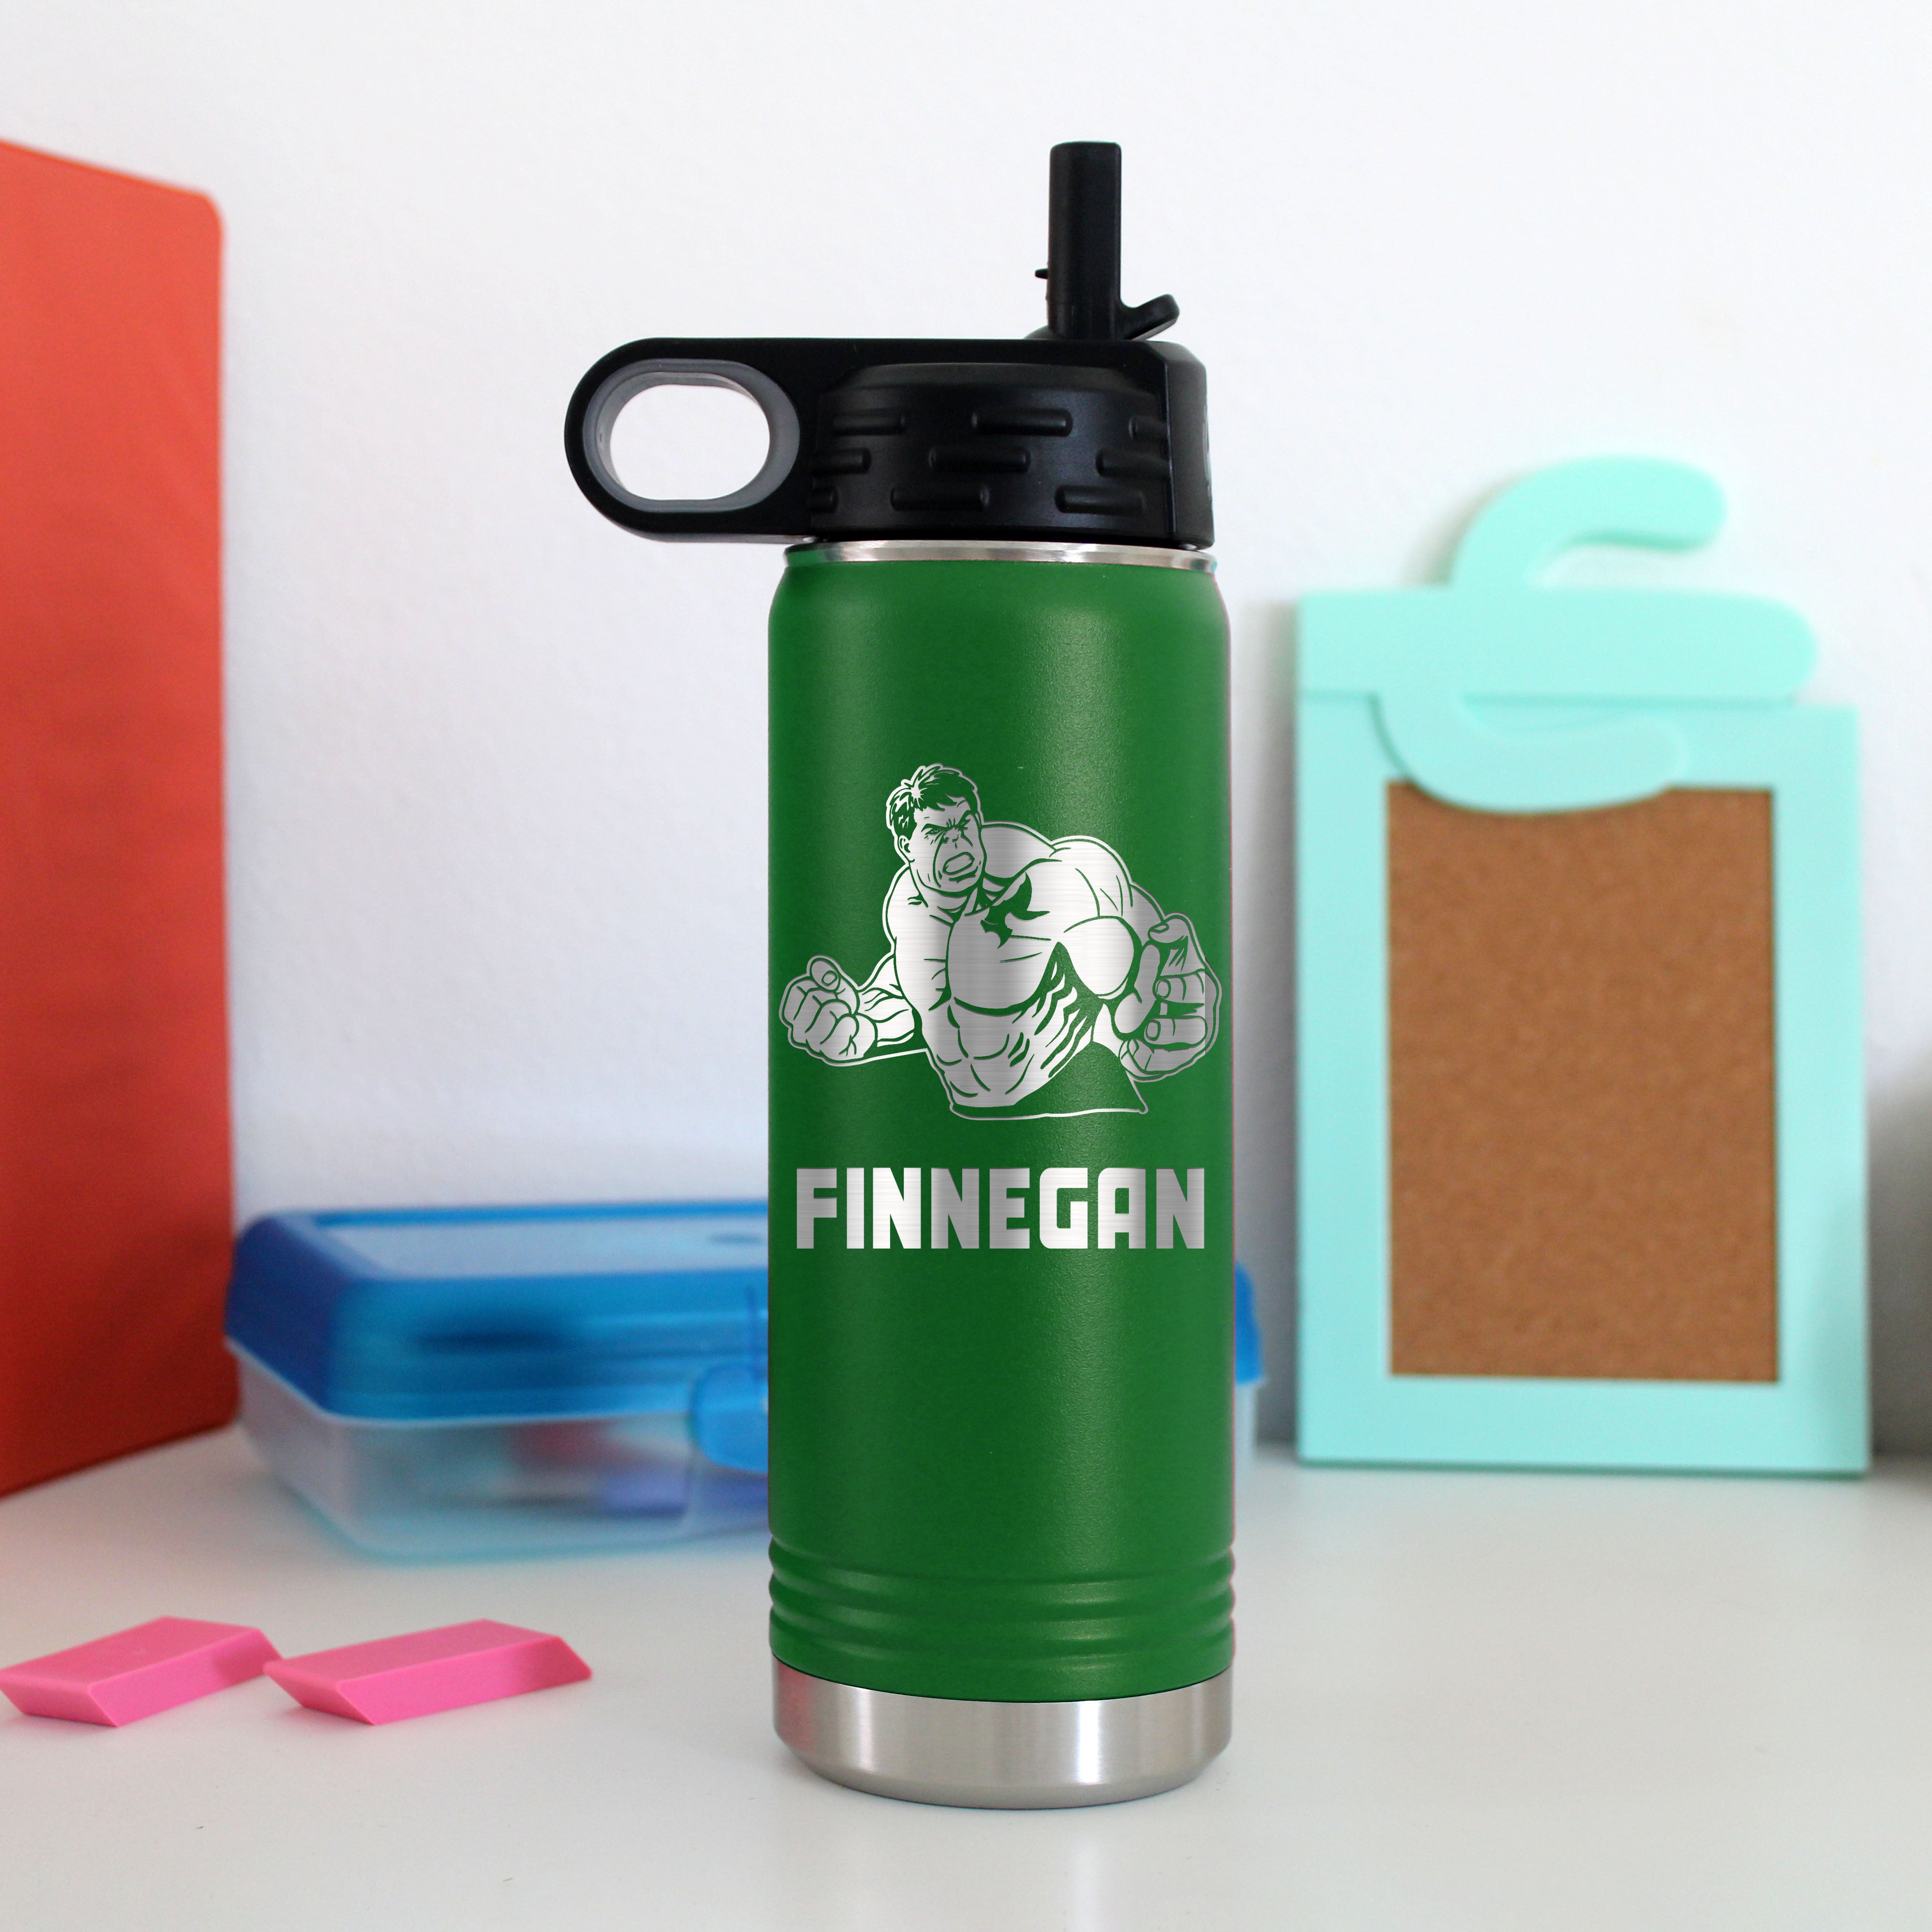 Incredible Hulk Water Bottle, White and Green